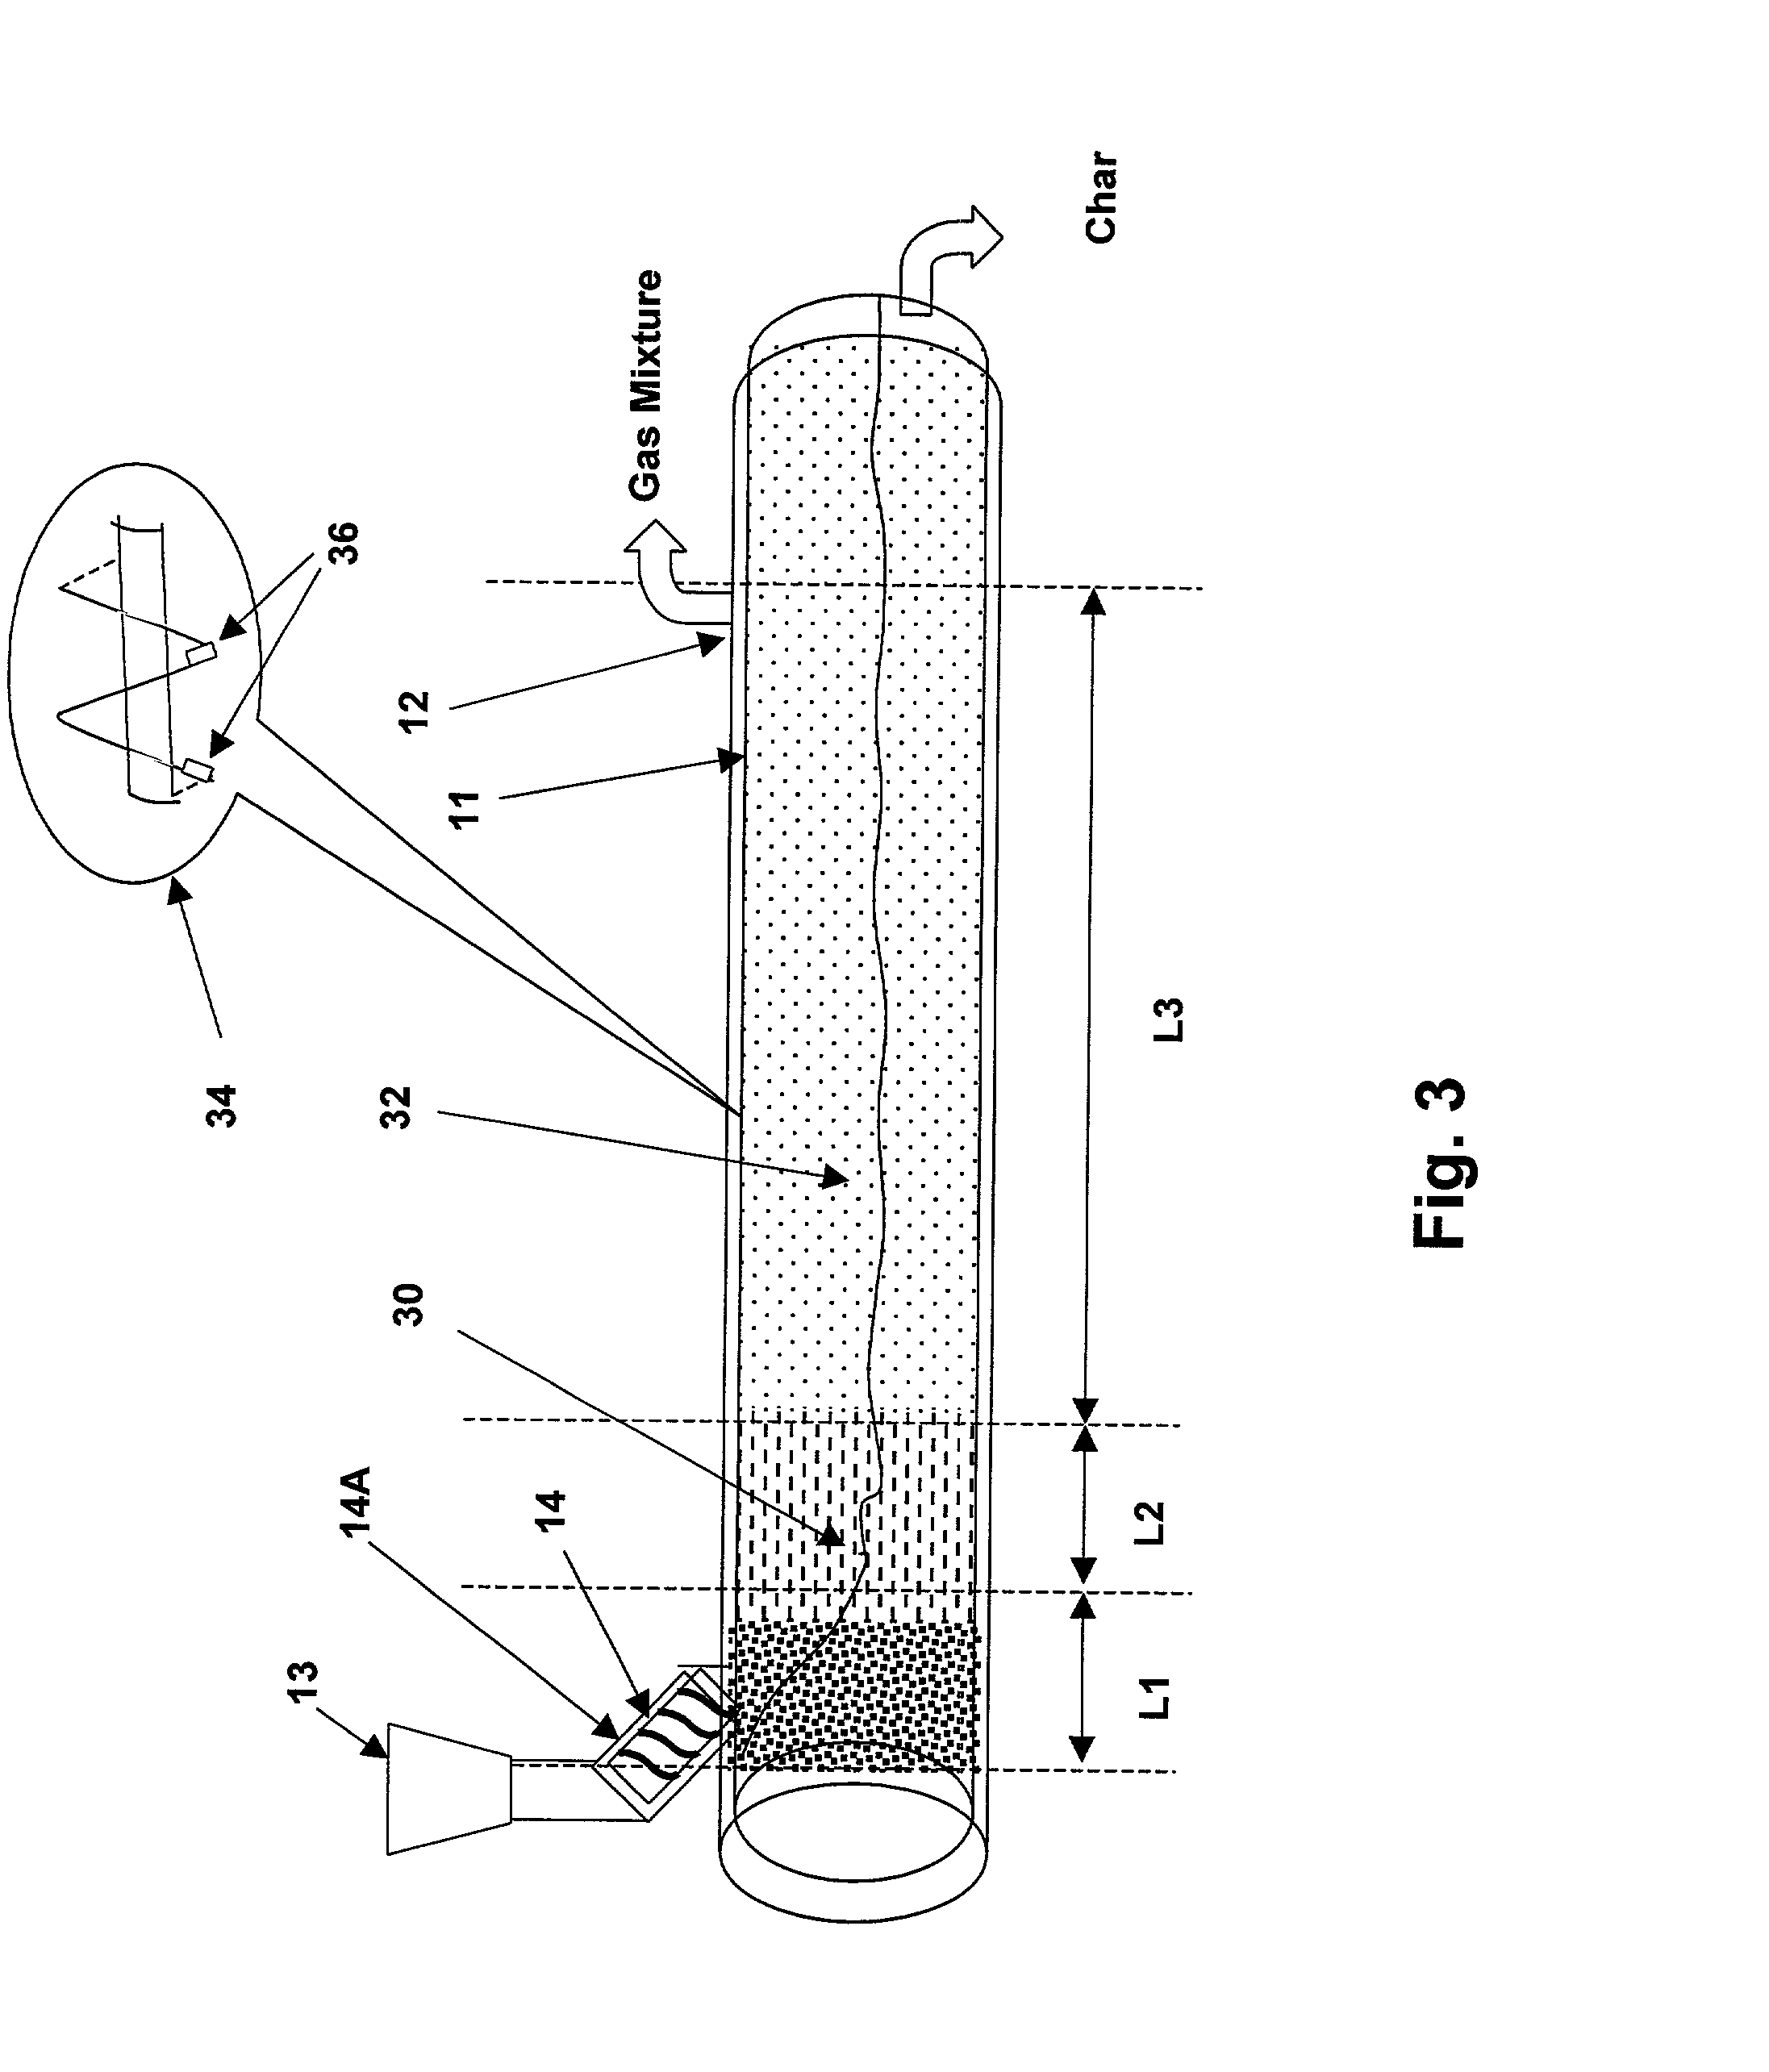 Method and system for extracting hydrocarbon fuel products from plastic material